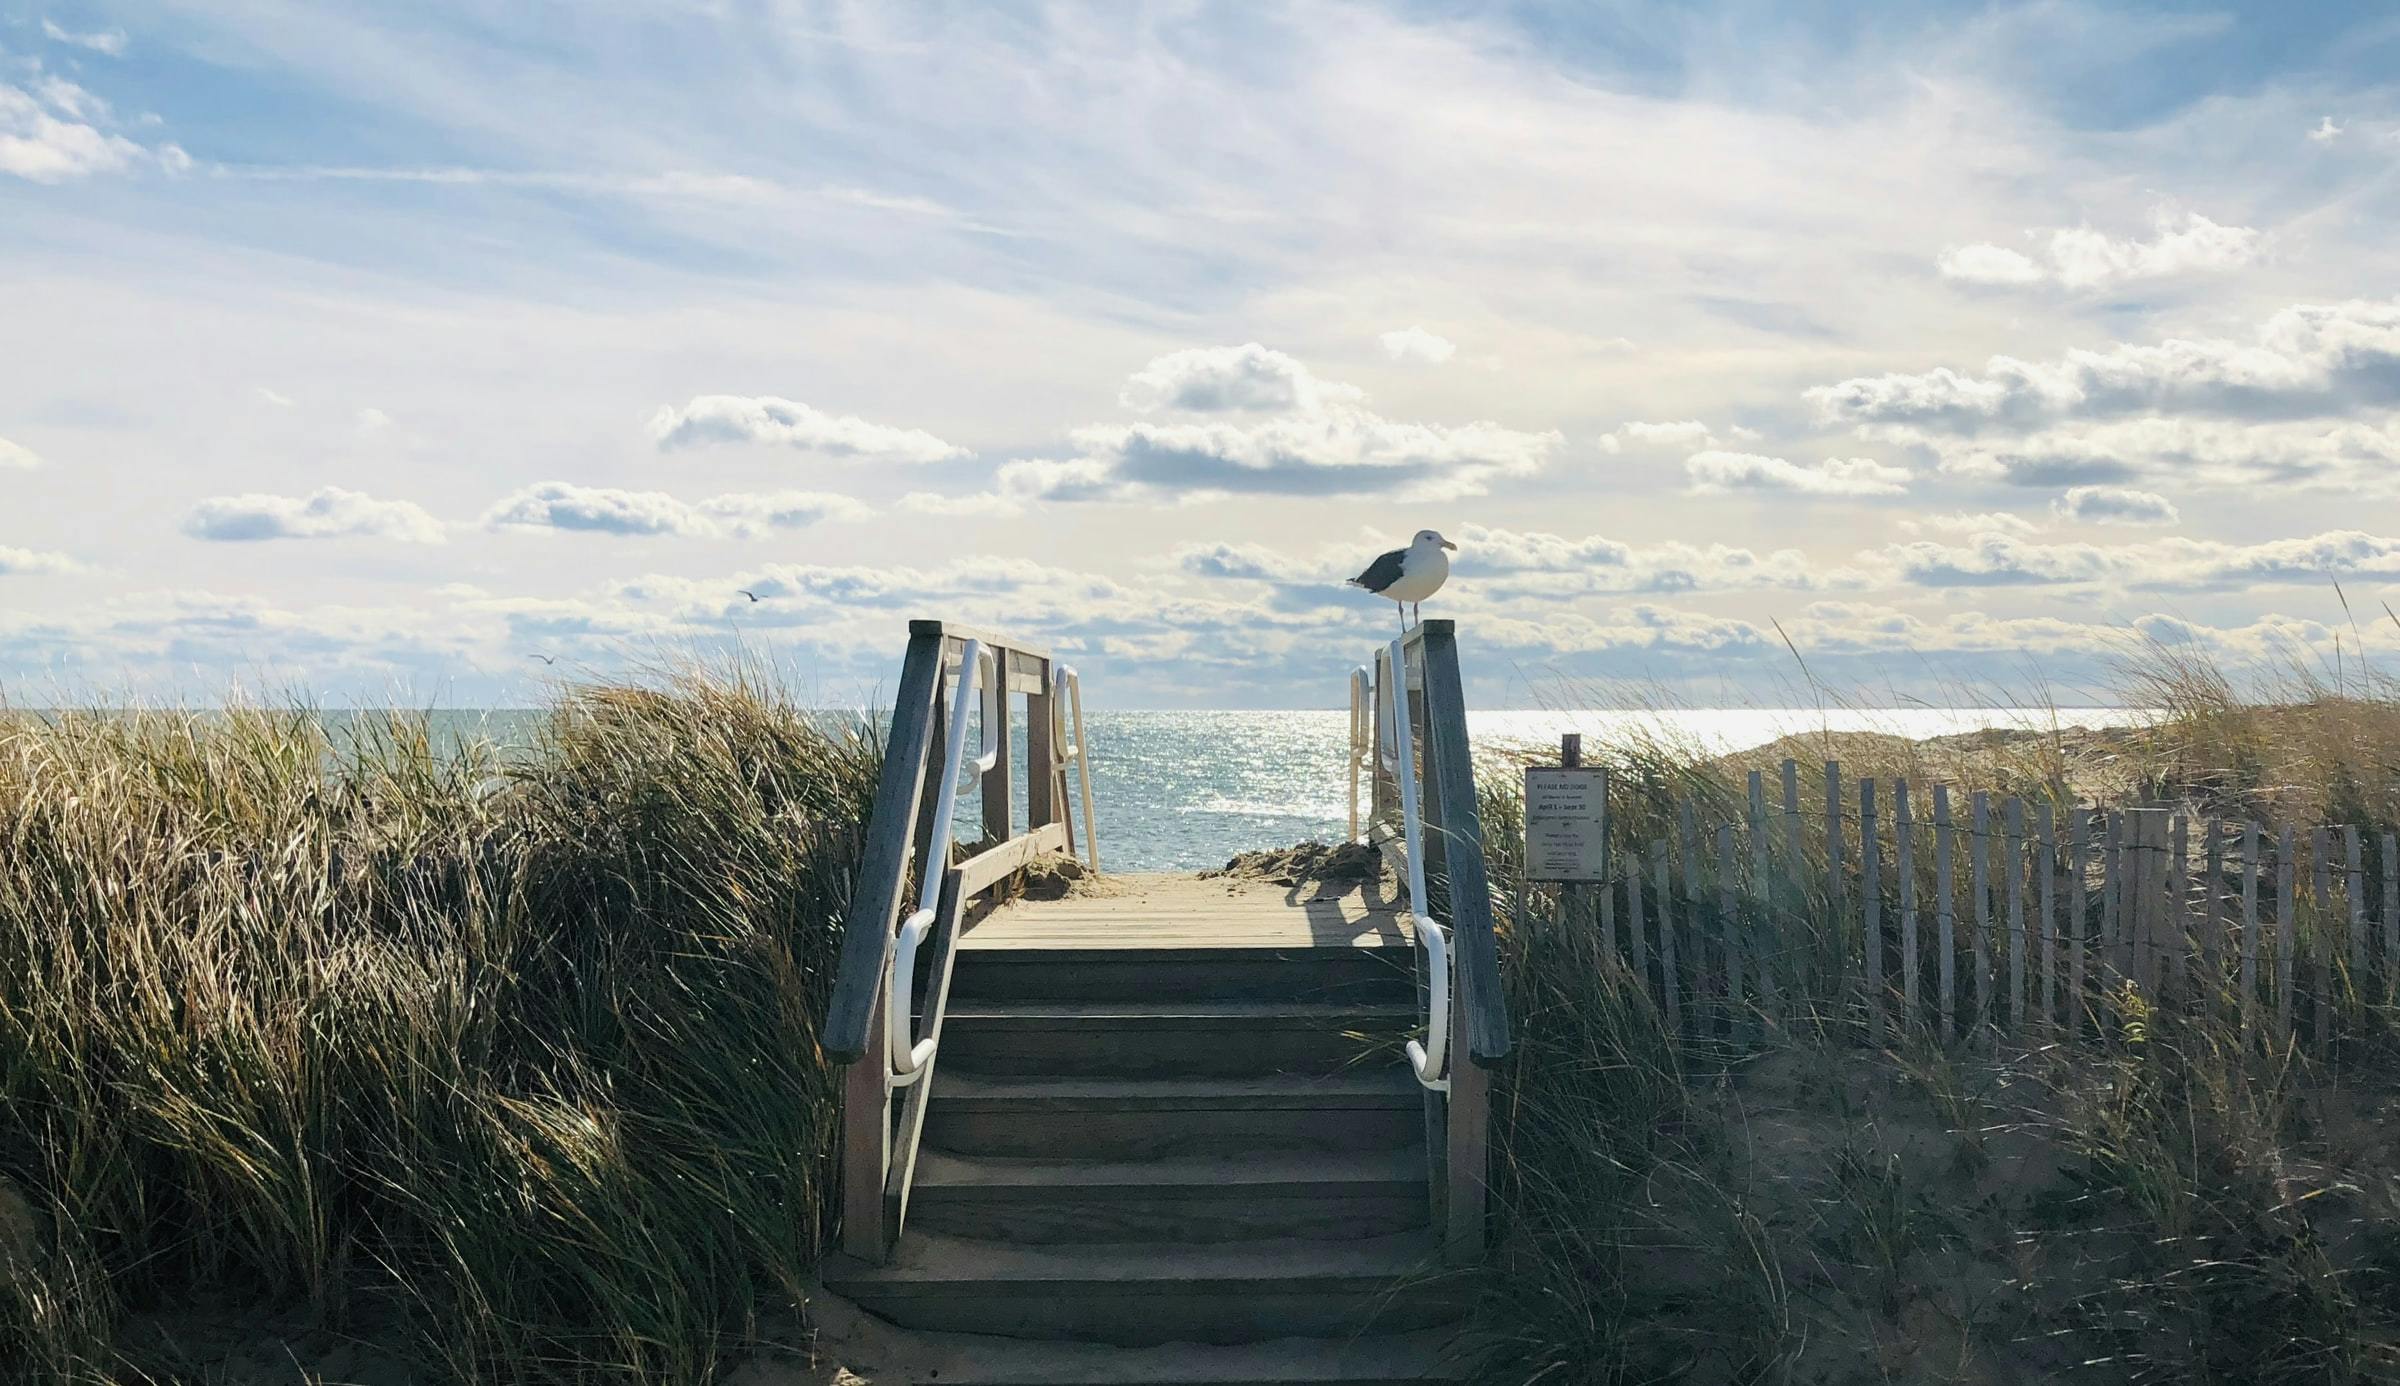 A wooden staircase leading up to the beach in Cape Cod. A seagull stands on the handrail. Coastal grasses line each side of the stairs. 